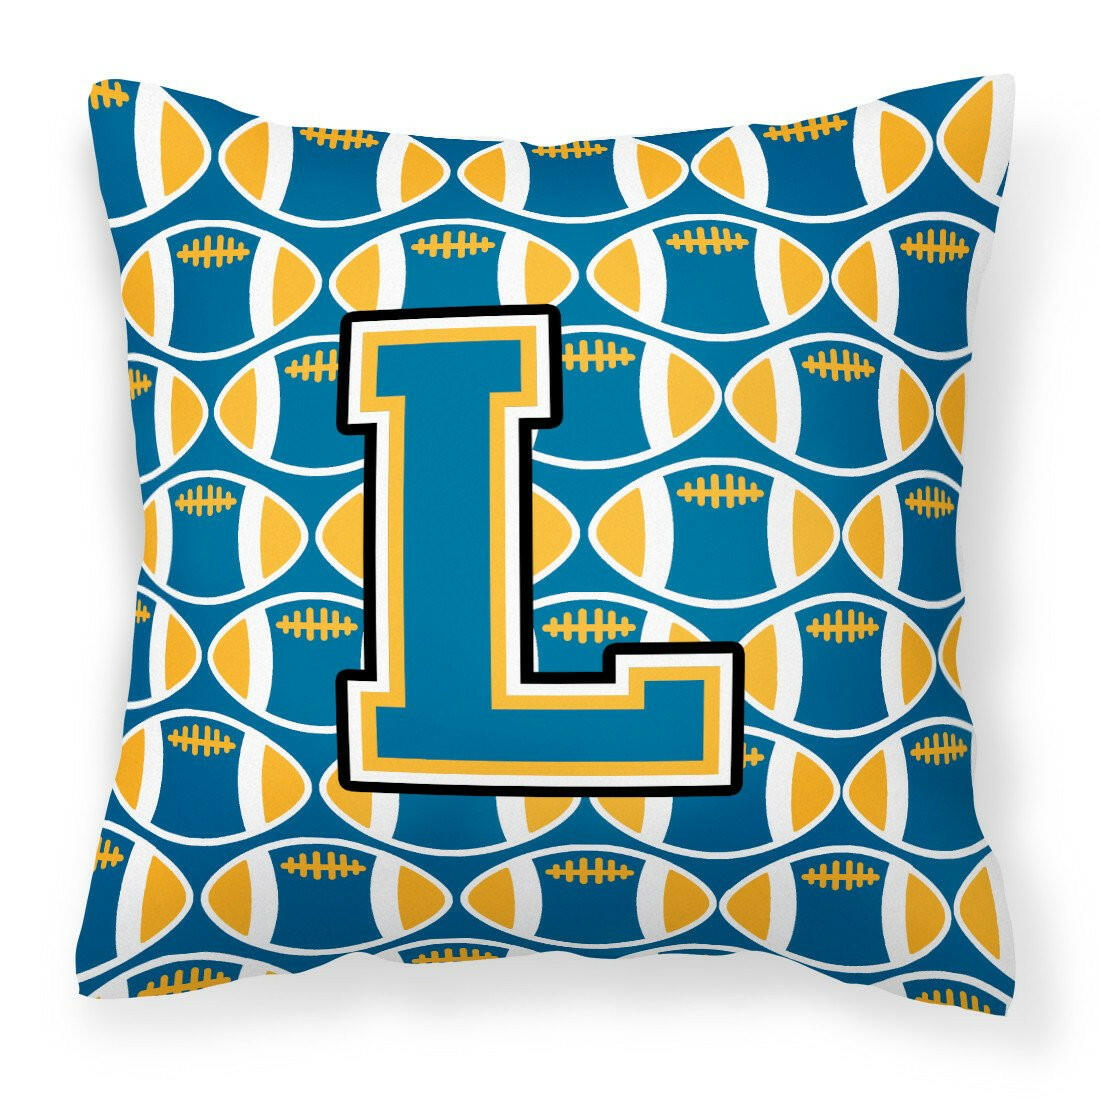 Letter L Football Blue and Gold Fabric Decorative Pillow CJ1077-LPW1414 by Caroline's Treasures